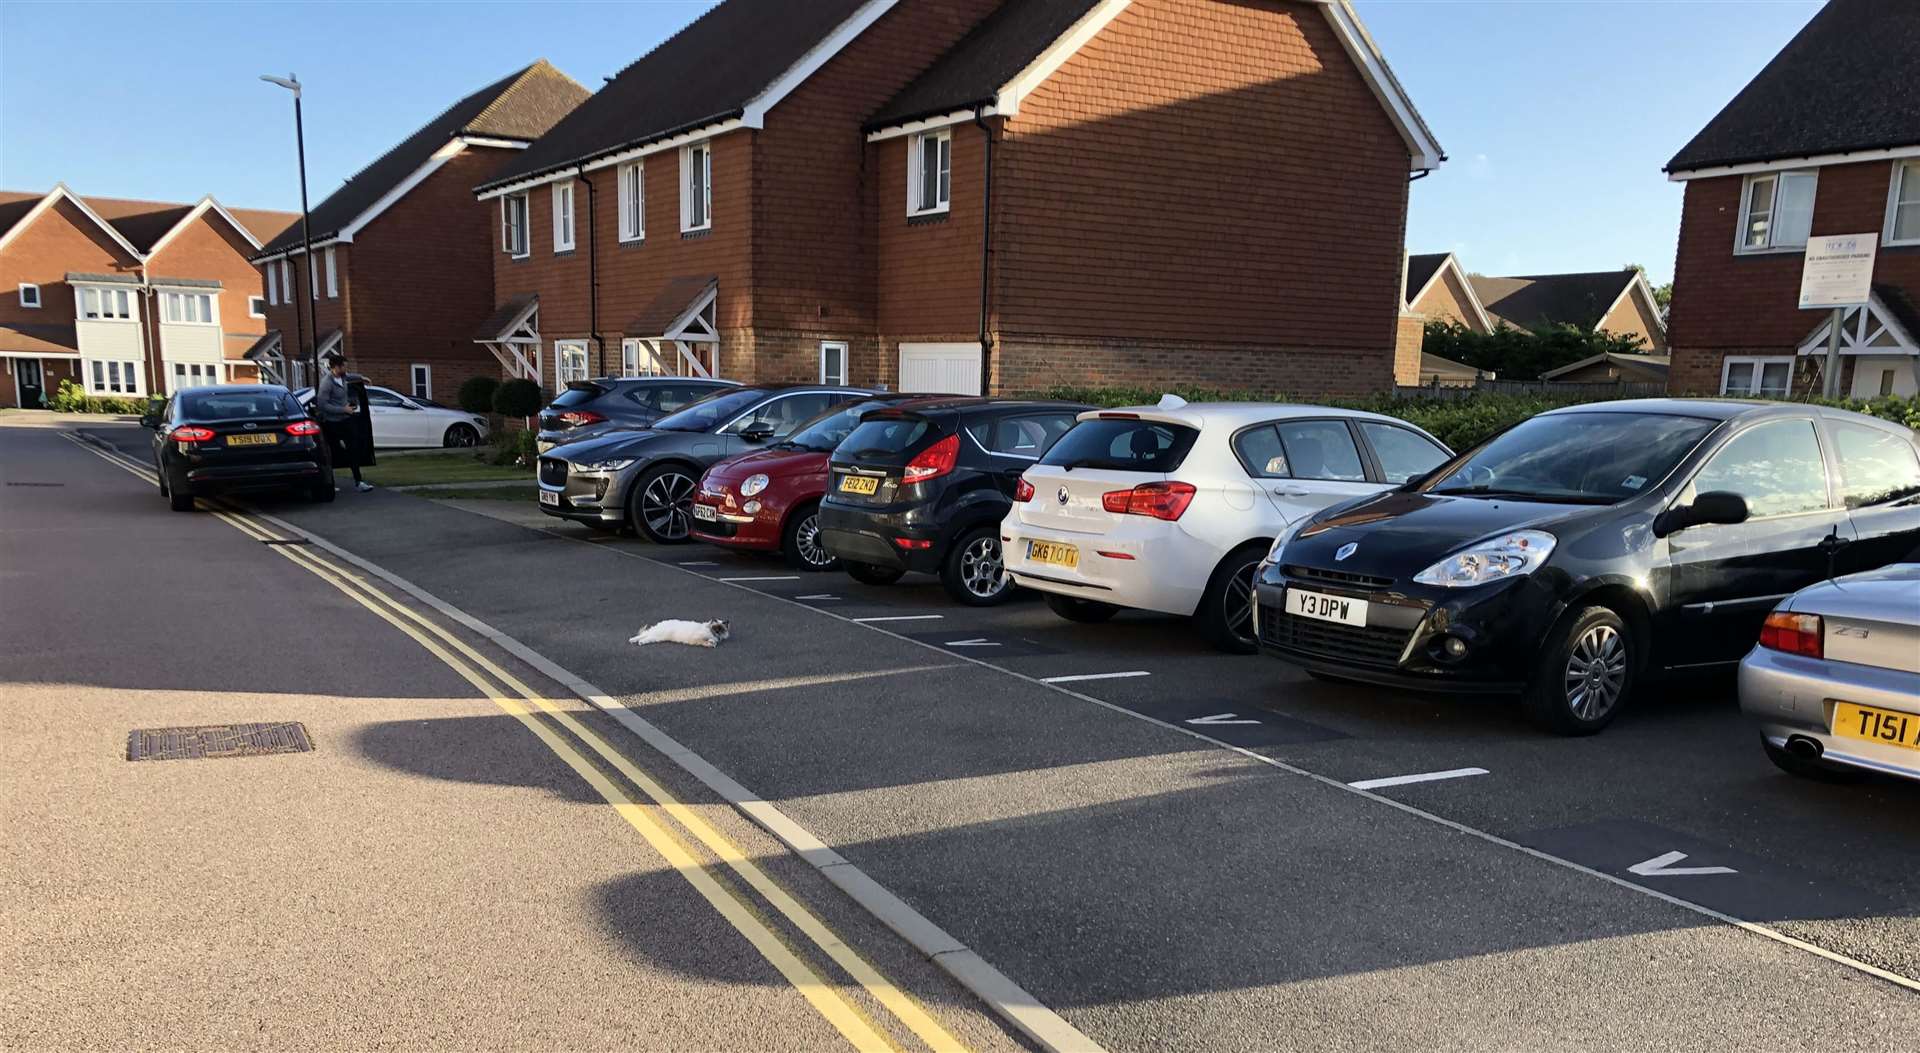 Residents were warned by Tonbridge and Malling council that the double yellow lines would be enforced in September 2020